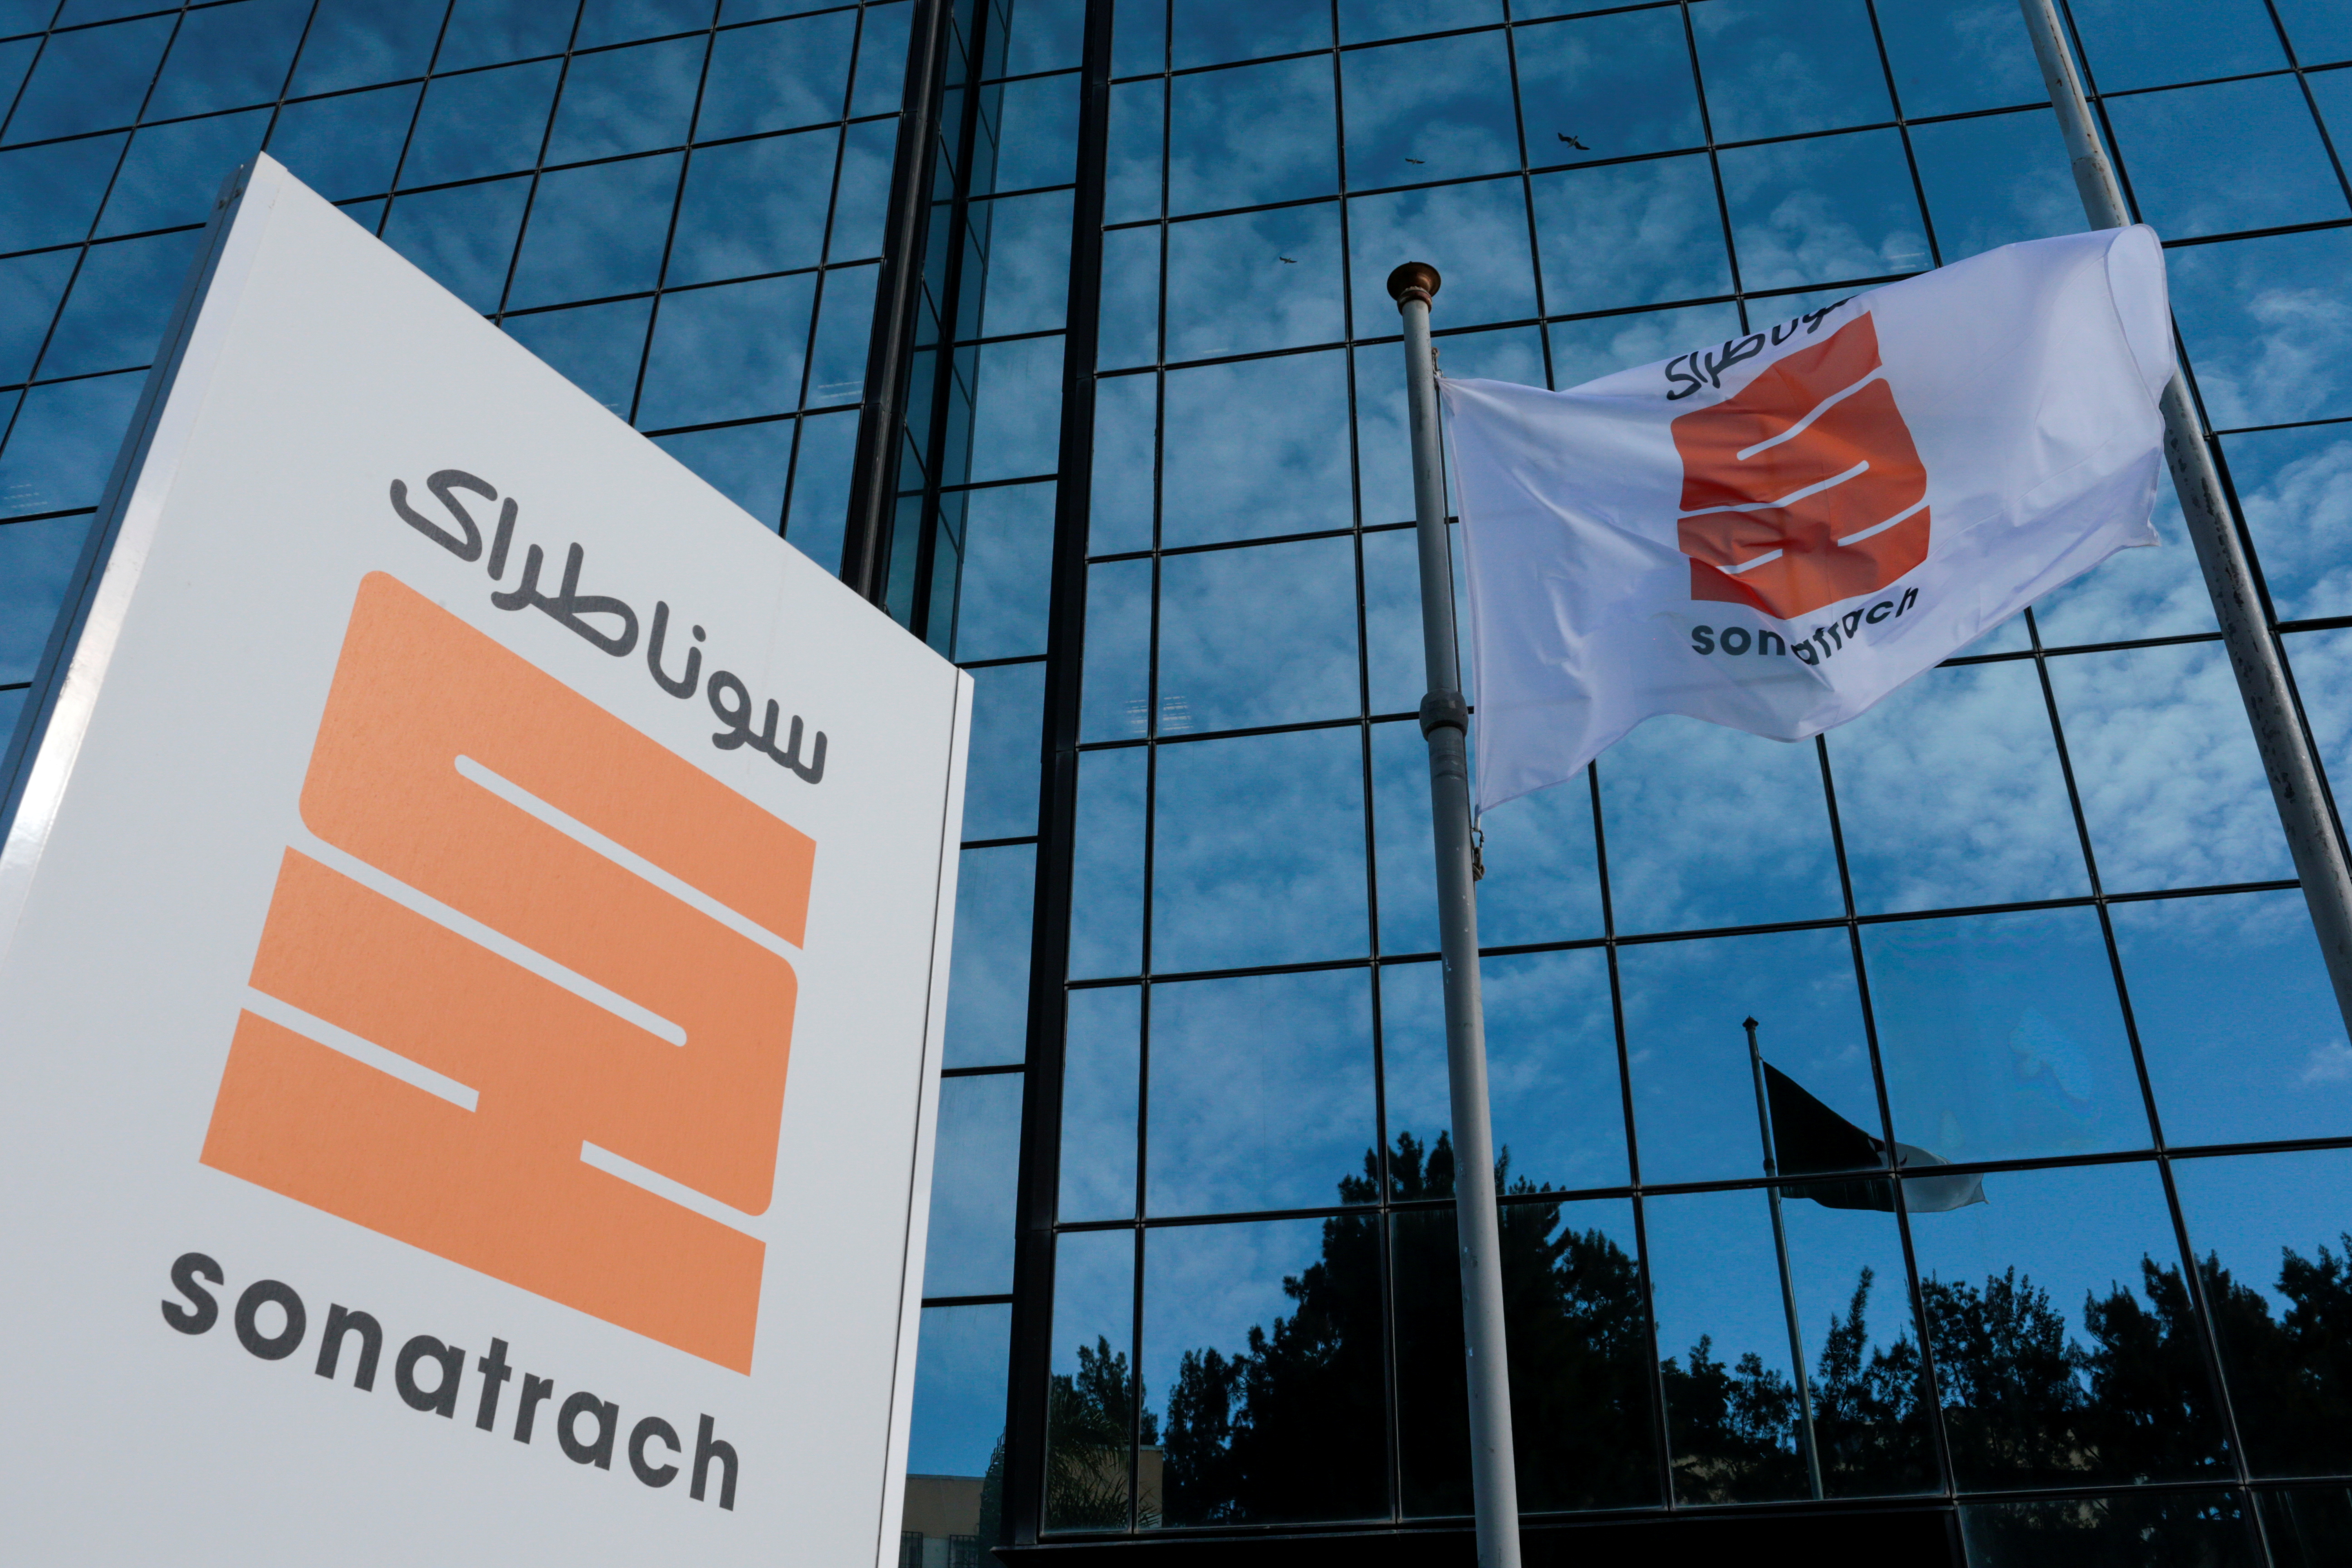 The logo of the state energy company Sonatrach is pictured at the headquarters in Algiers